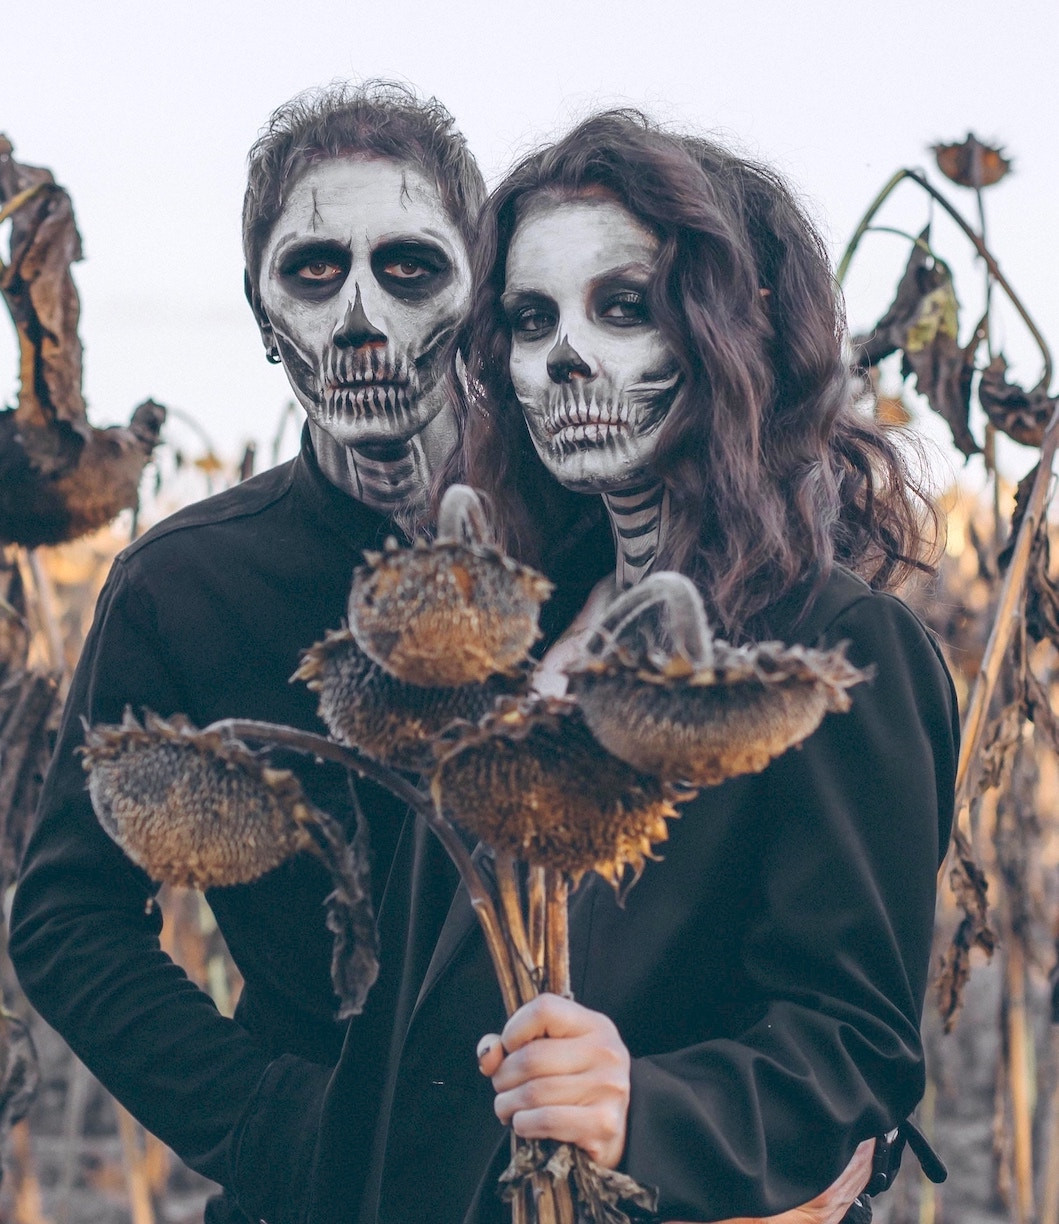 Is Your Marriage Haunted? Three Must-Try Strategies to Transform It from Spooky to Spectacular.